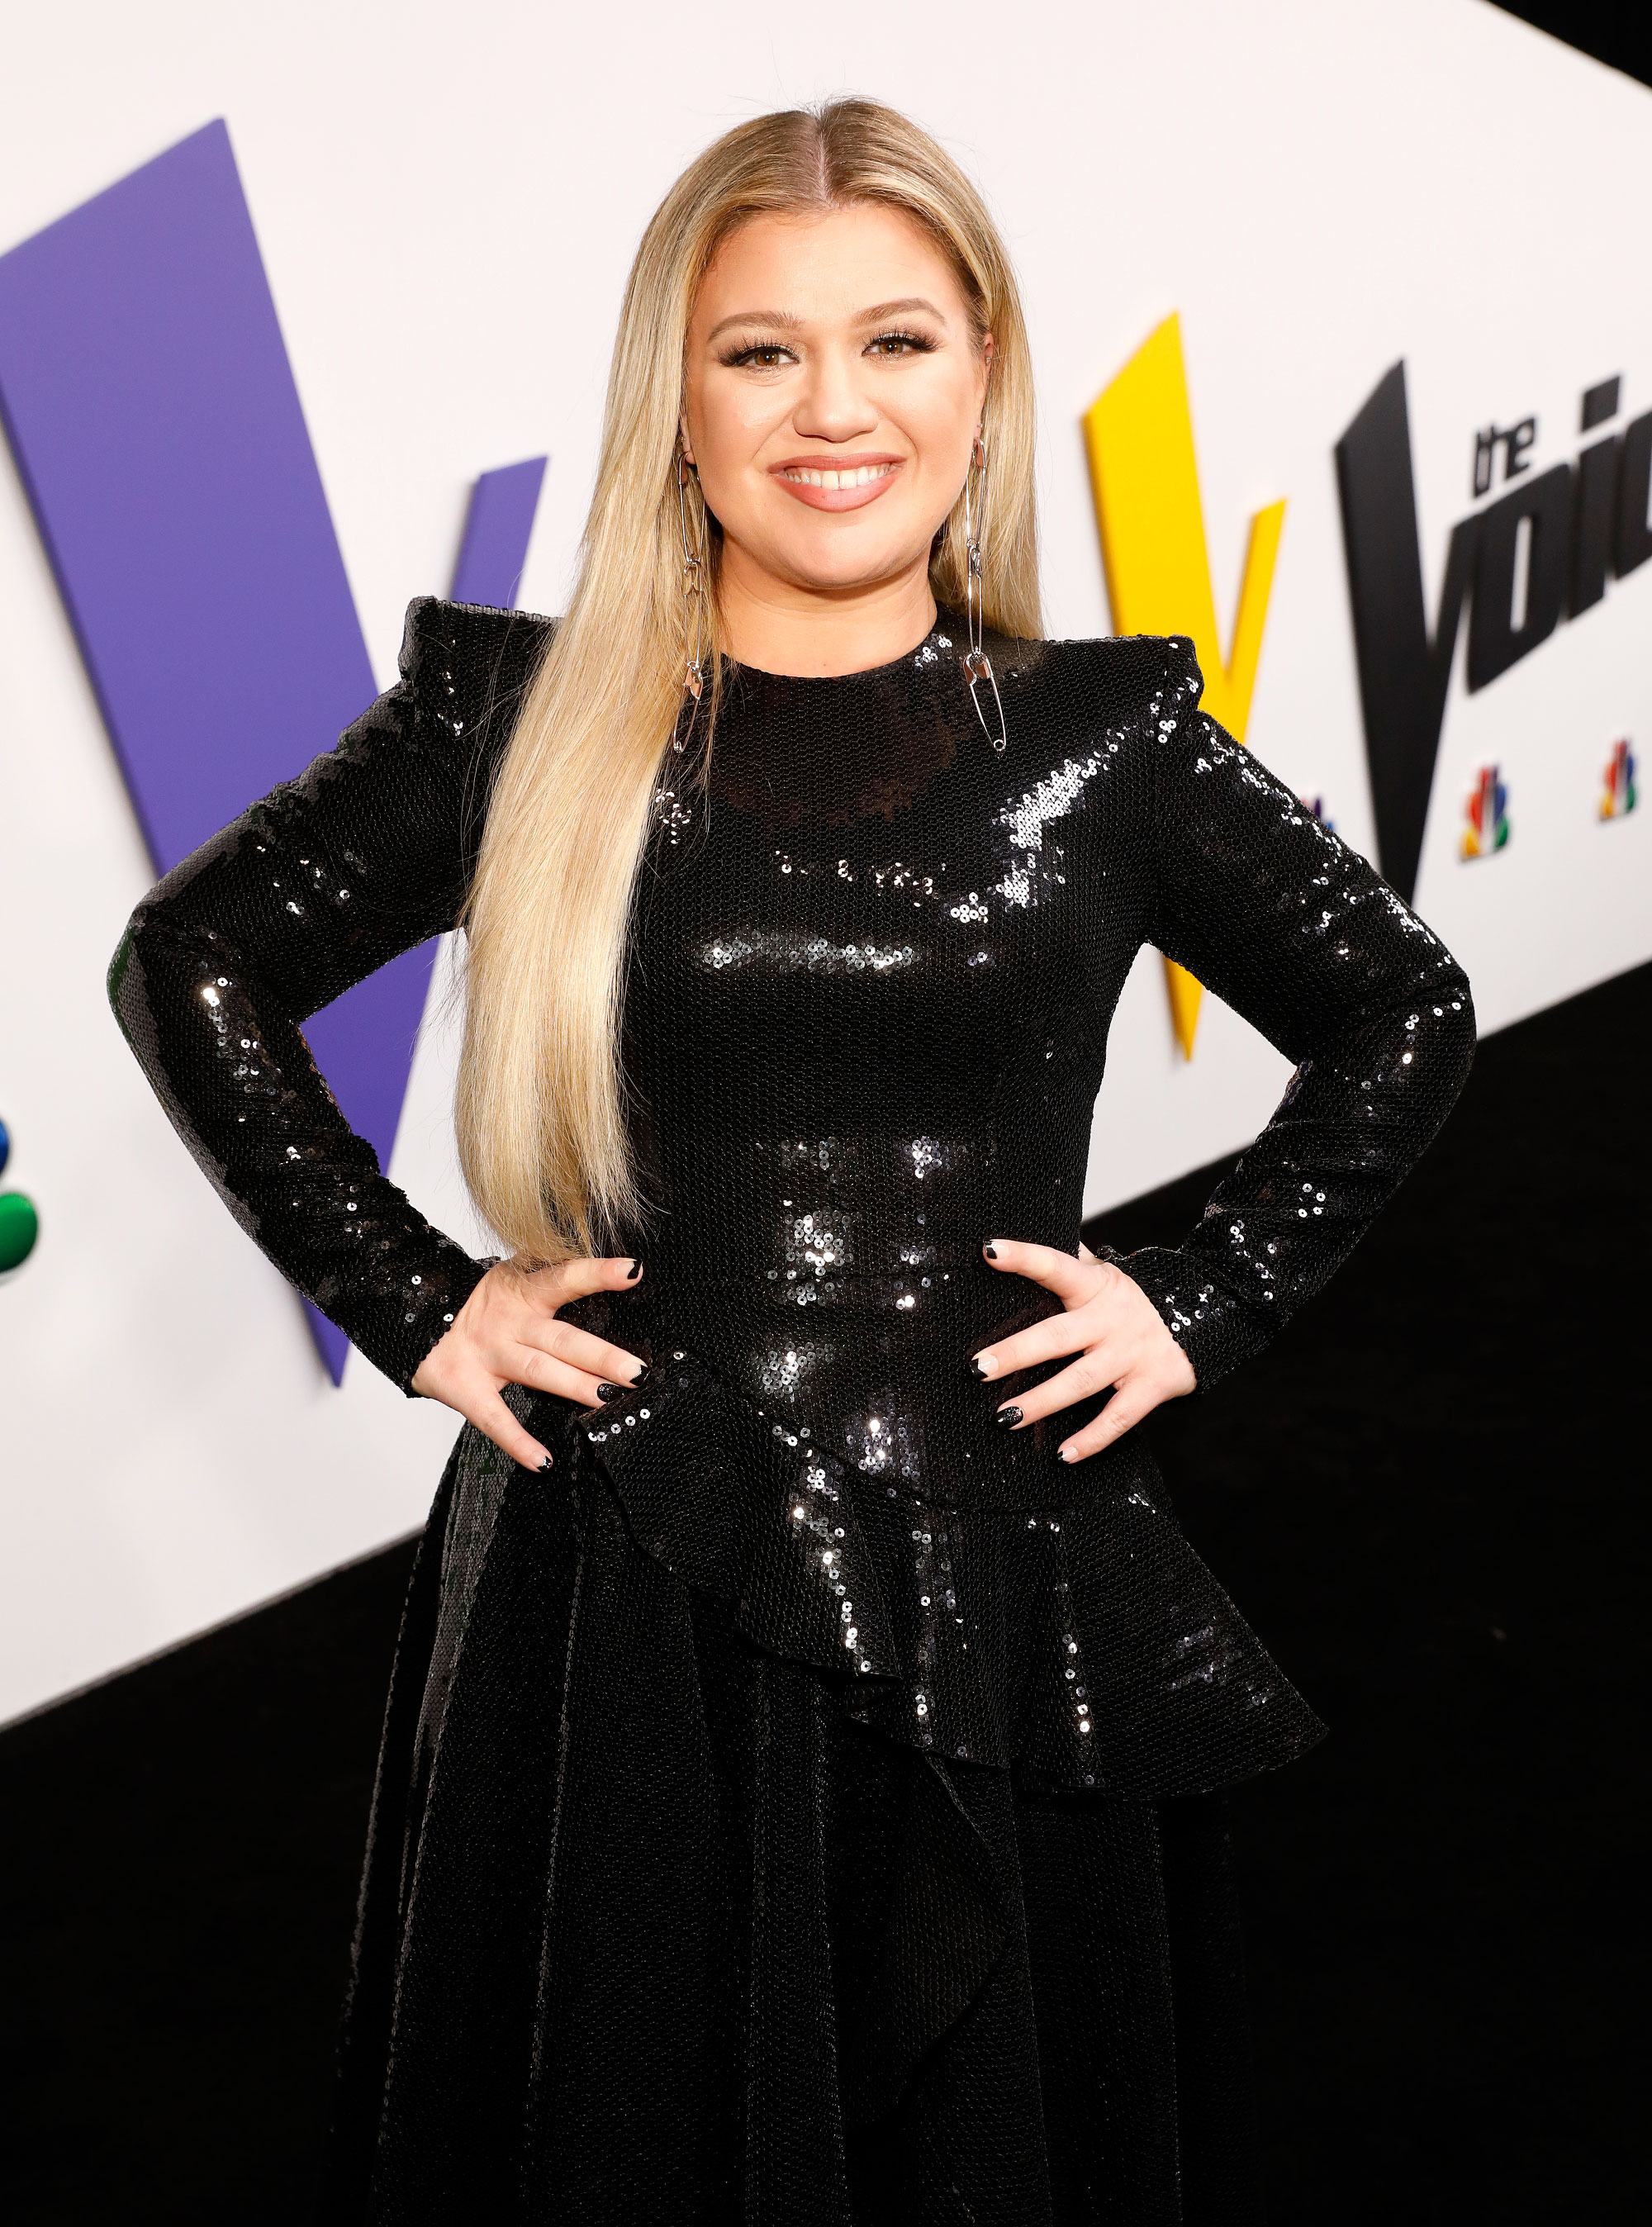 Kelly Clarkson Raps to Cardi B in Trailer for Her New Talk Show